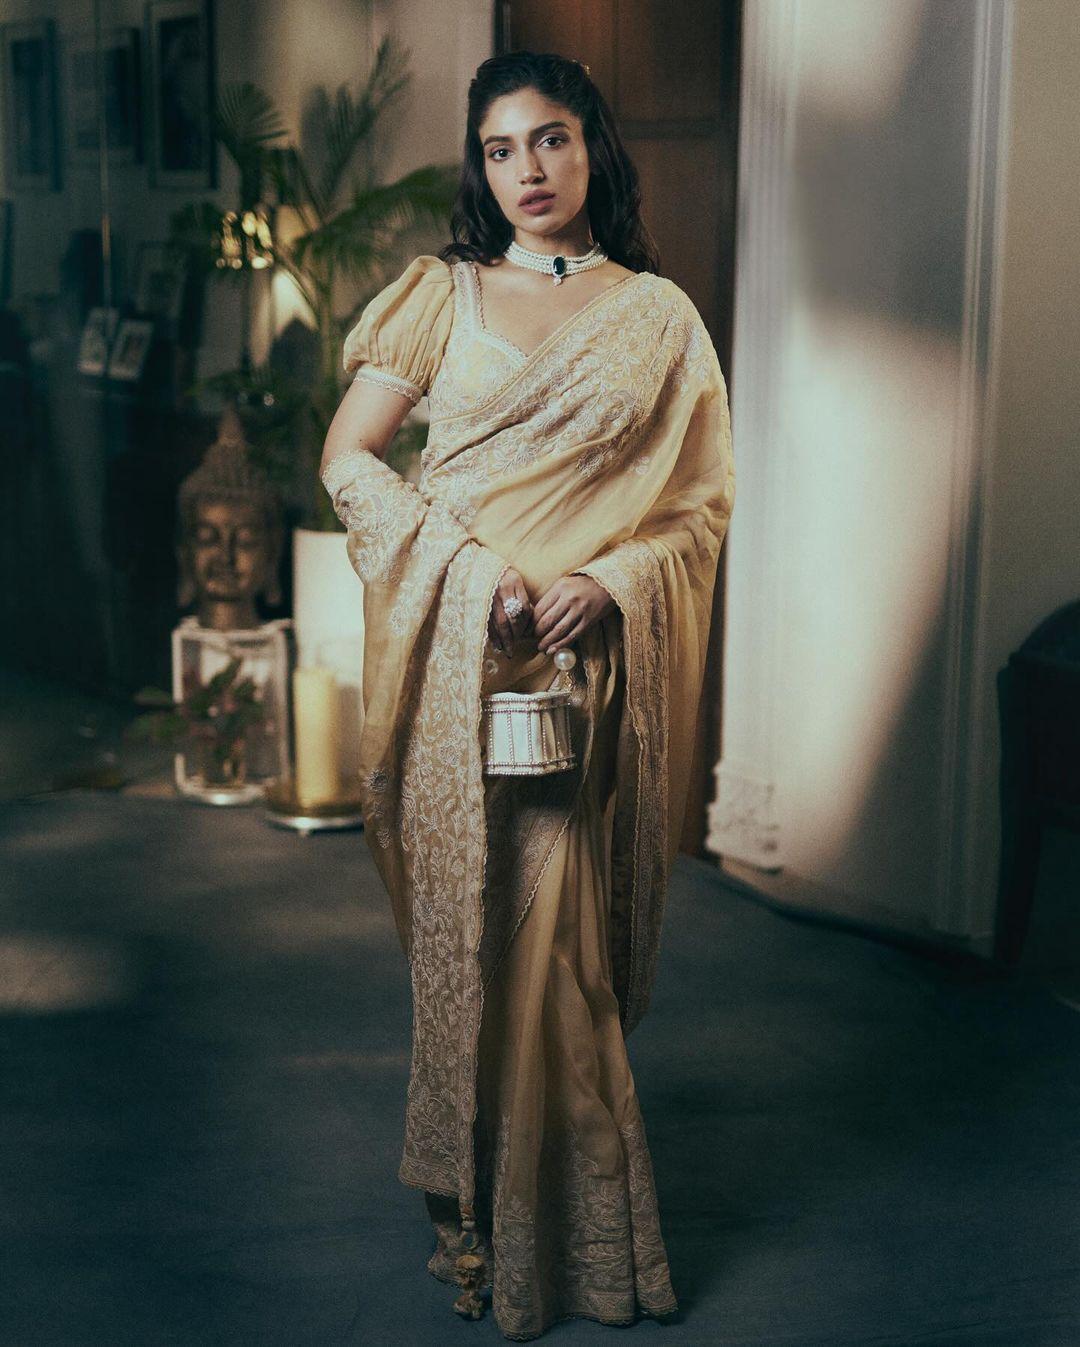 Bhumi Pednekar channelled her inner diva in this stunning look. The actress wore a heavy saree with decorated broad borders and paired it with a stylish blouse